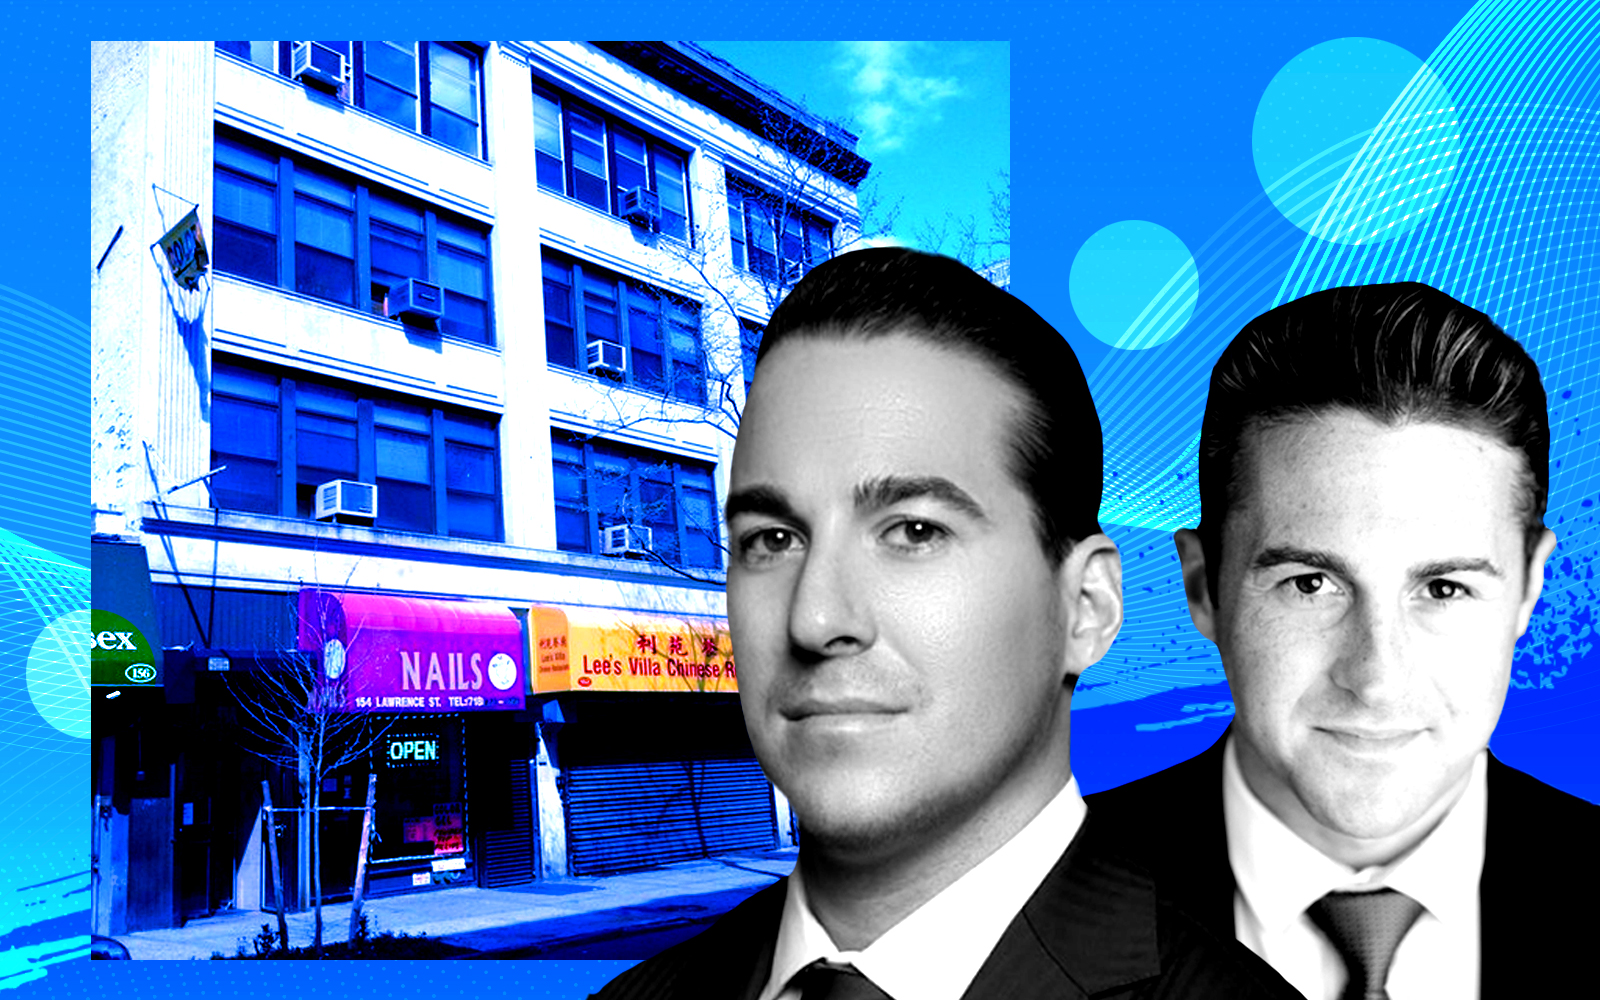 Flushing parcel, Downtown BK office building trade in midsize i-sales